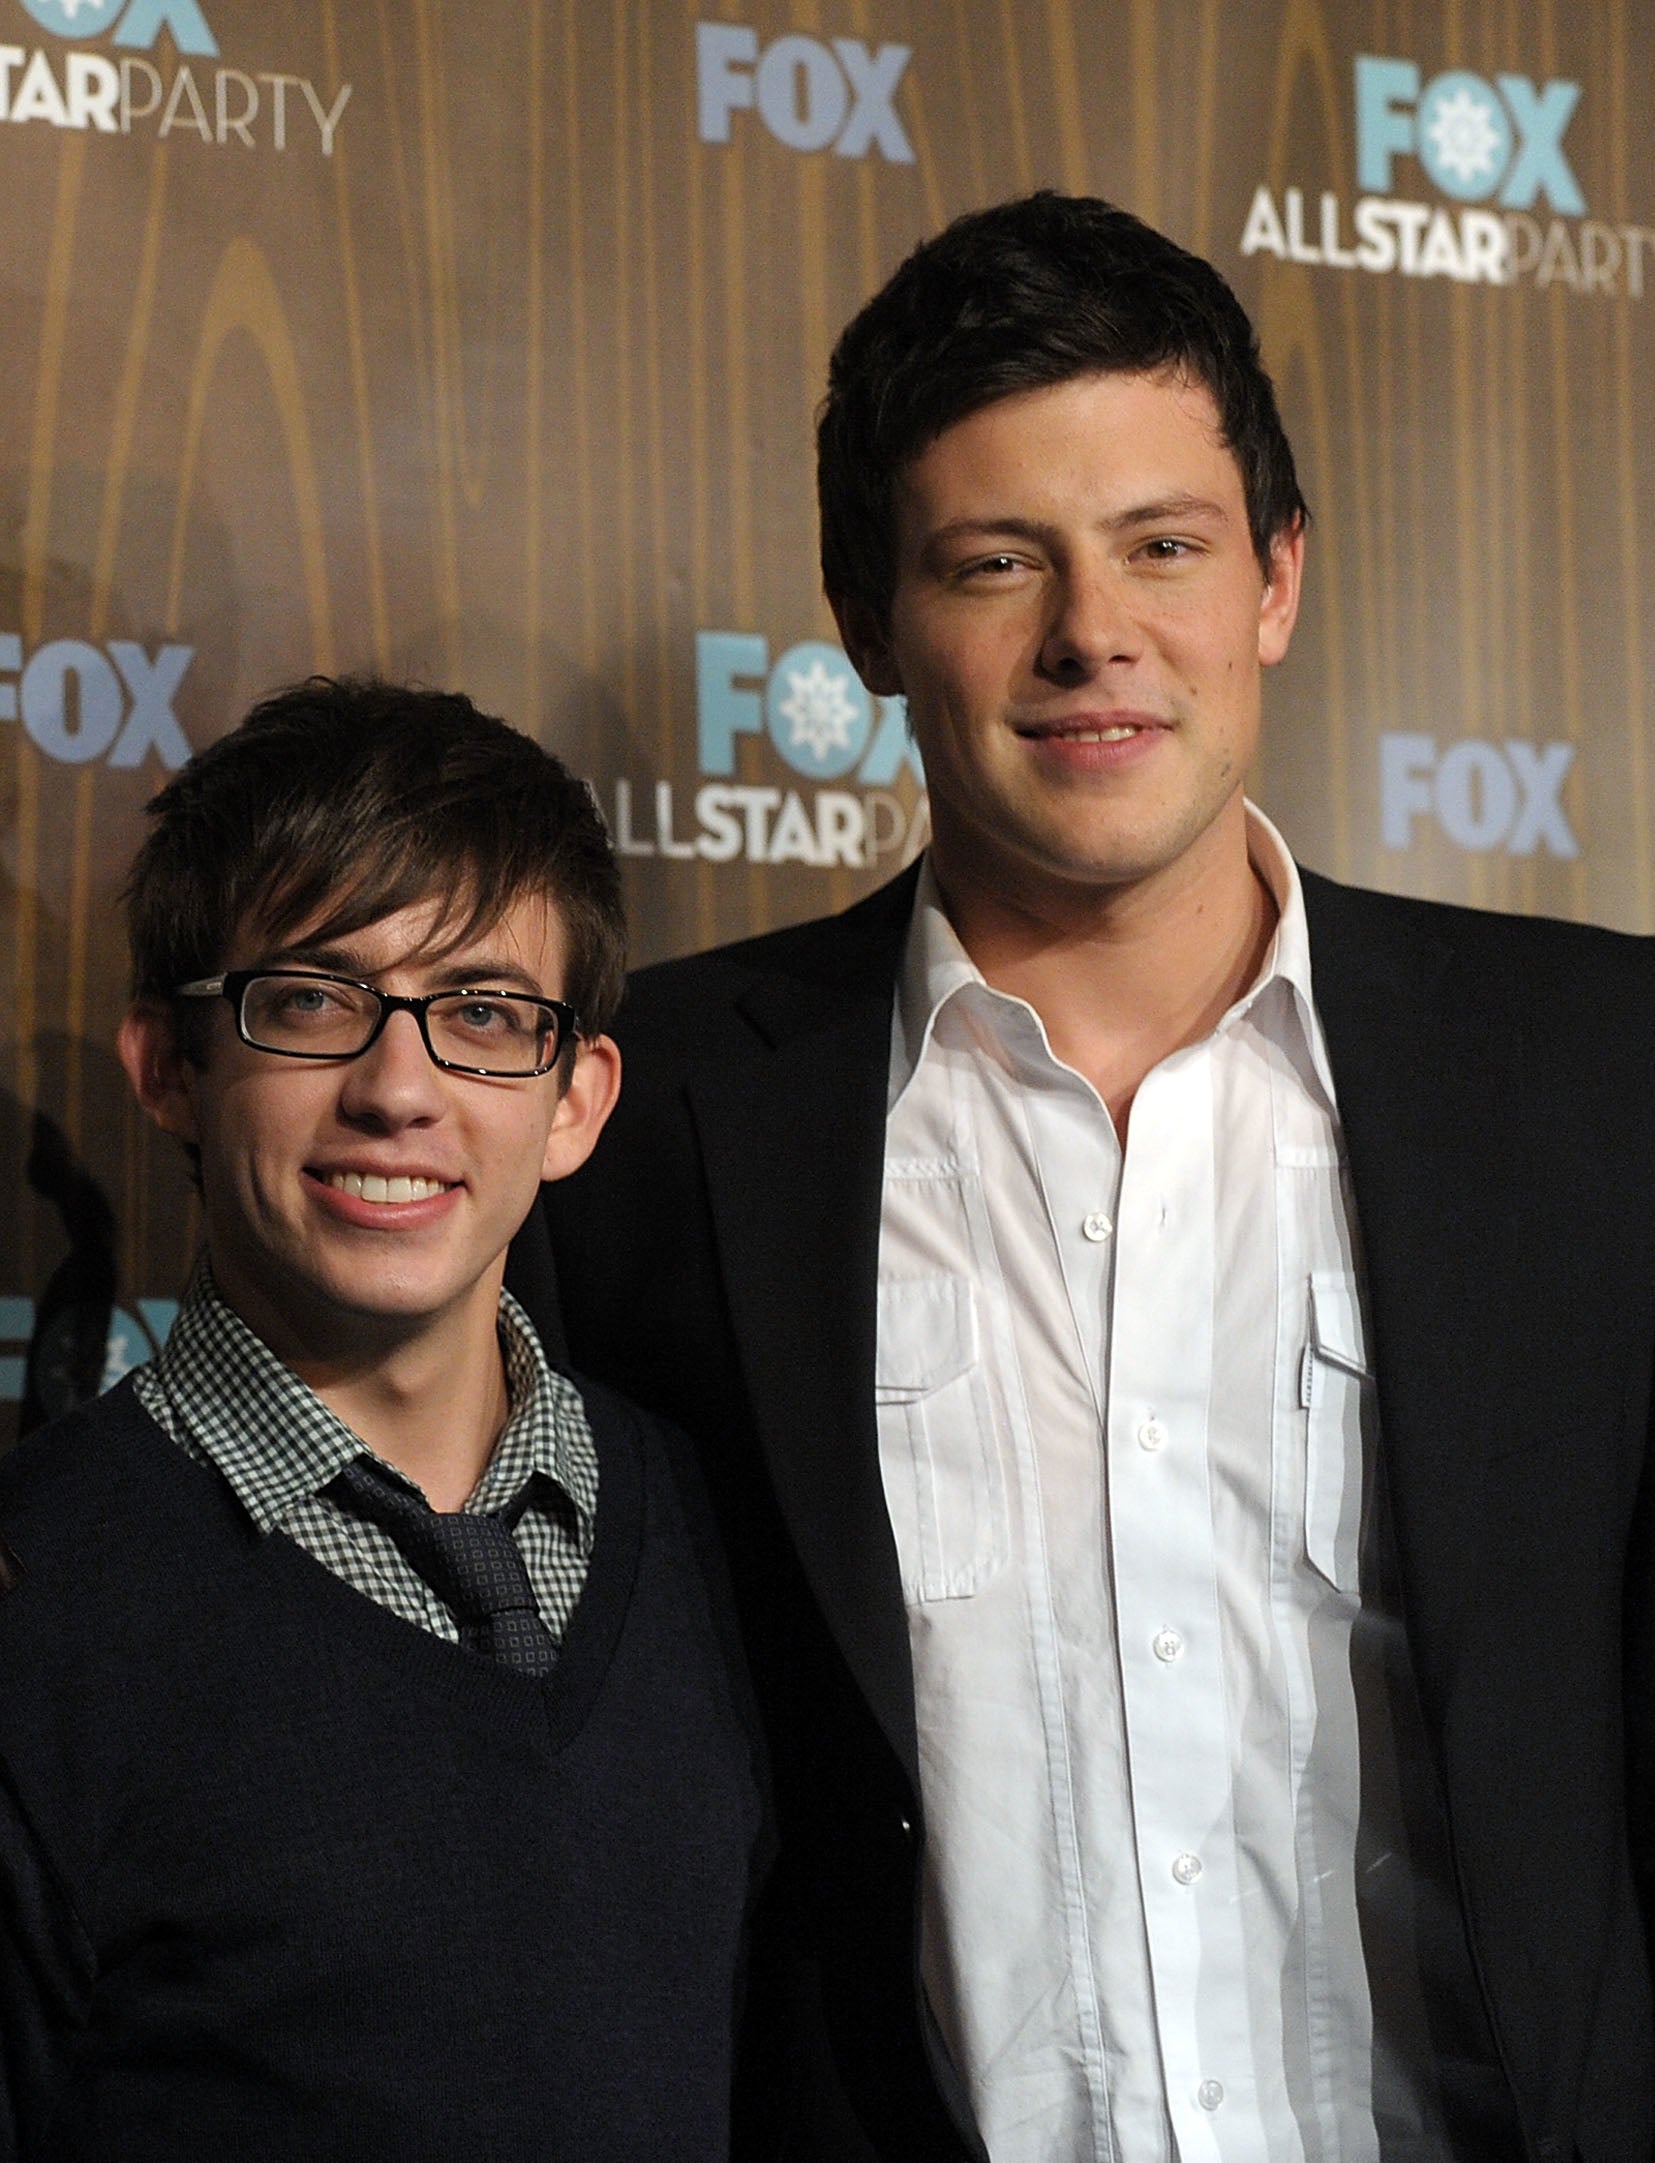 A closeup of Cory and Kevin